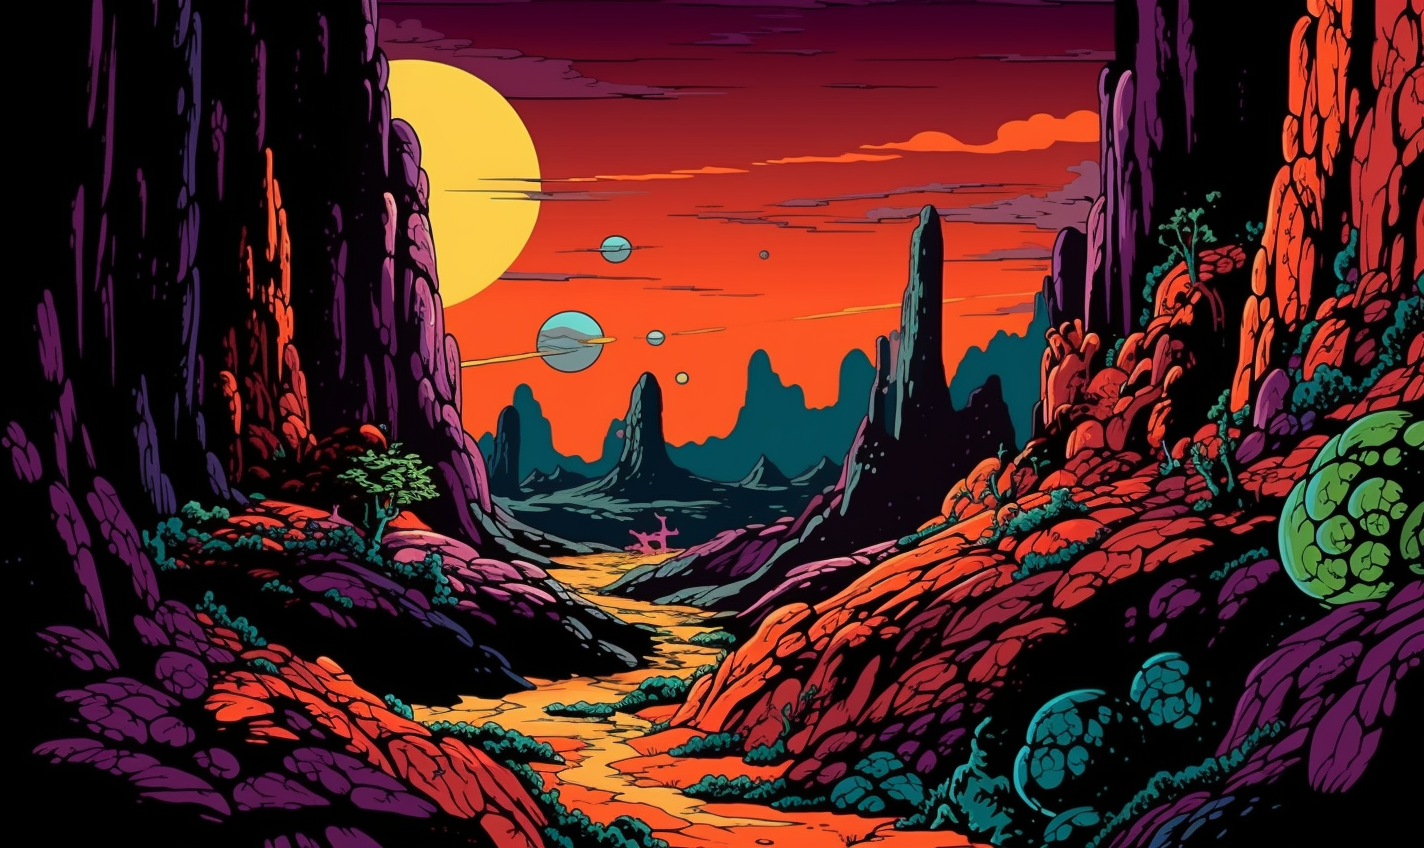 the__ed_a_planet_in_Hanna-Barbera_style_ntsc_colors_063724d5-98e3-4c69-9920-f086daeedfd7.png